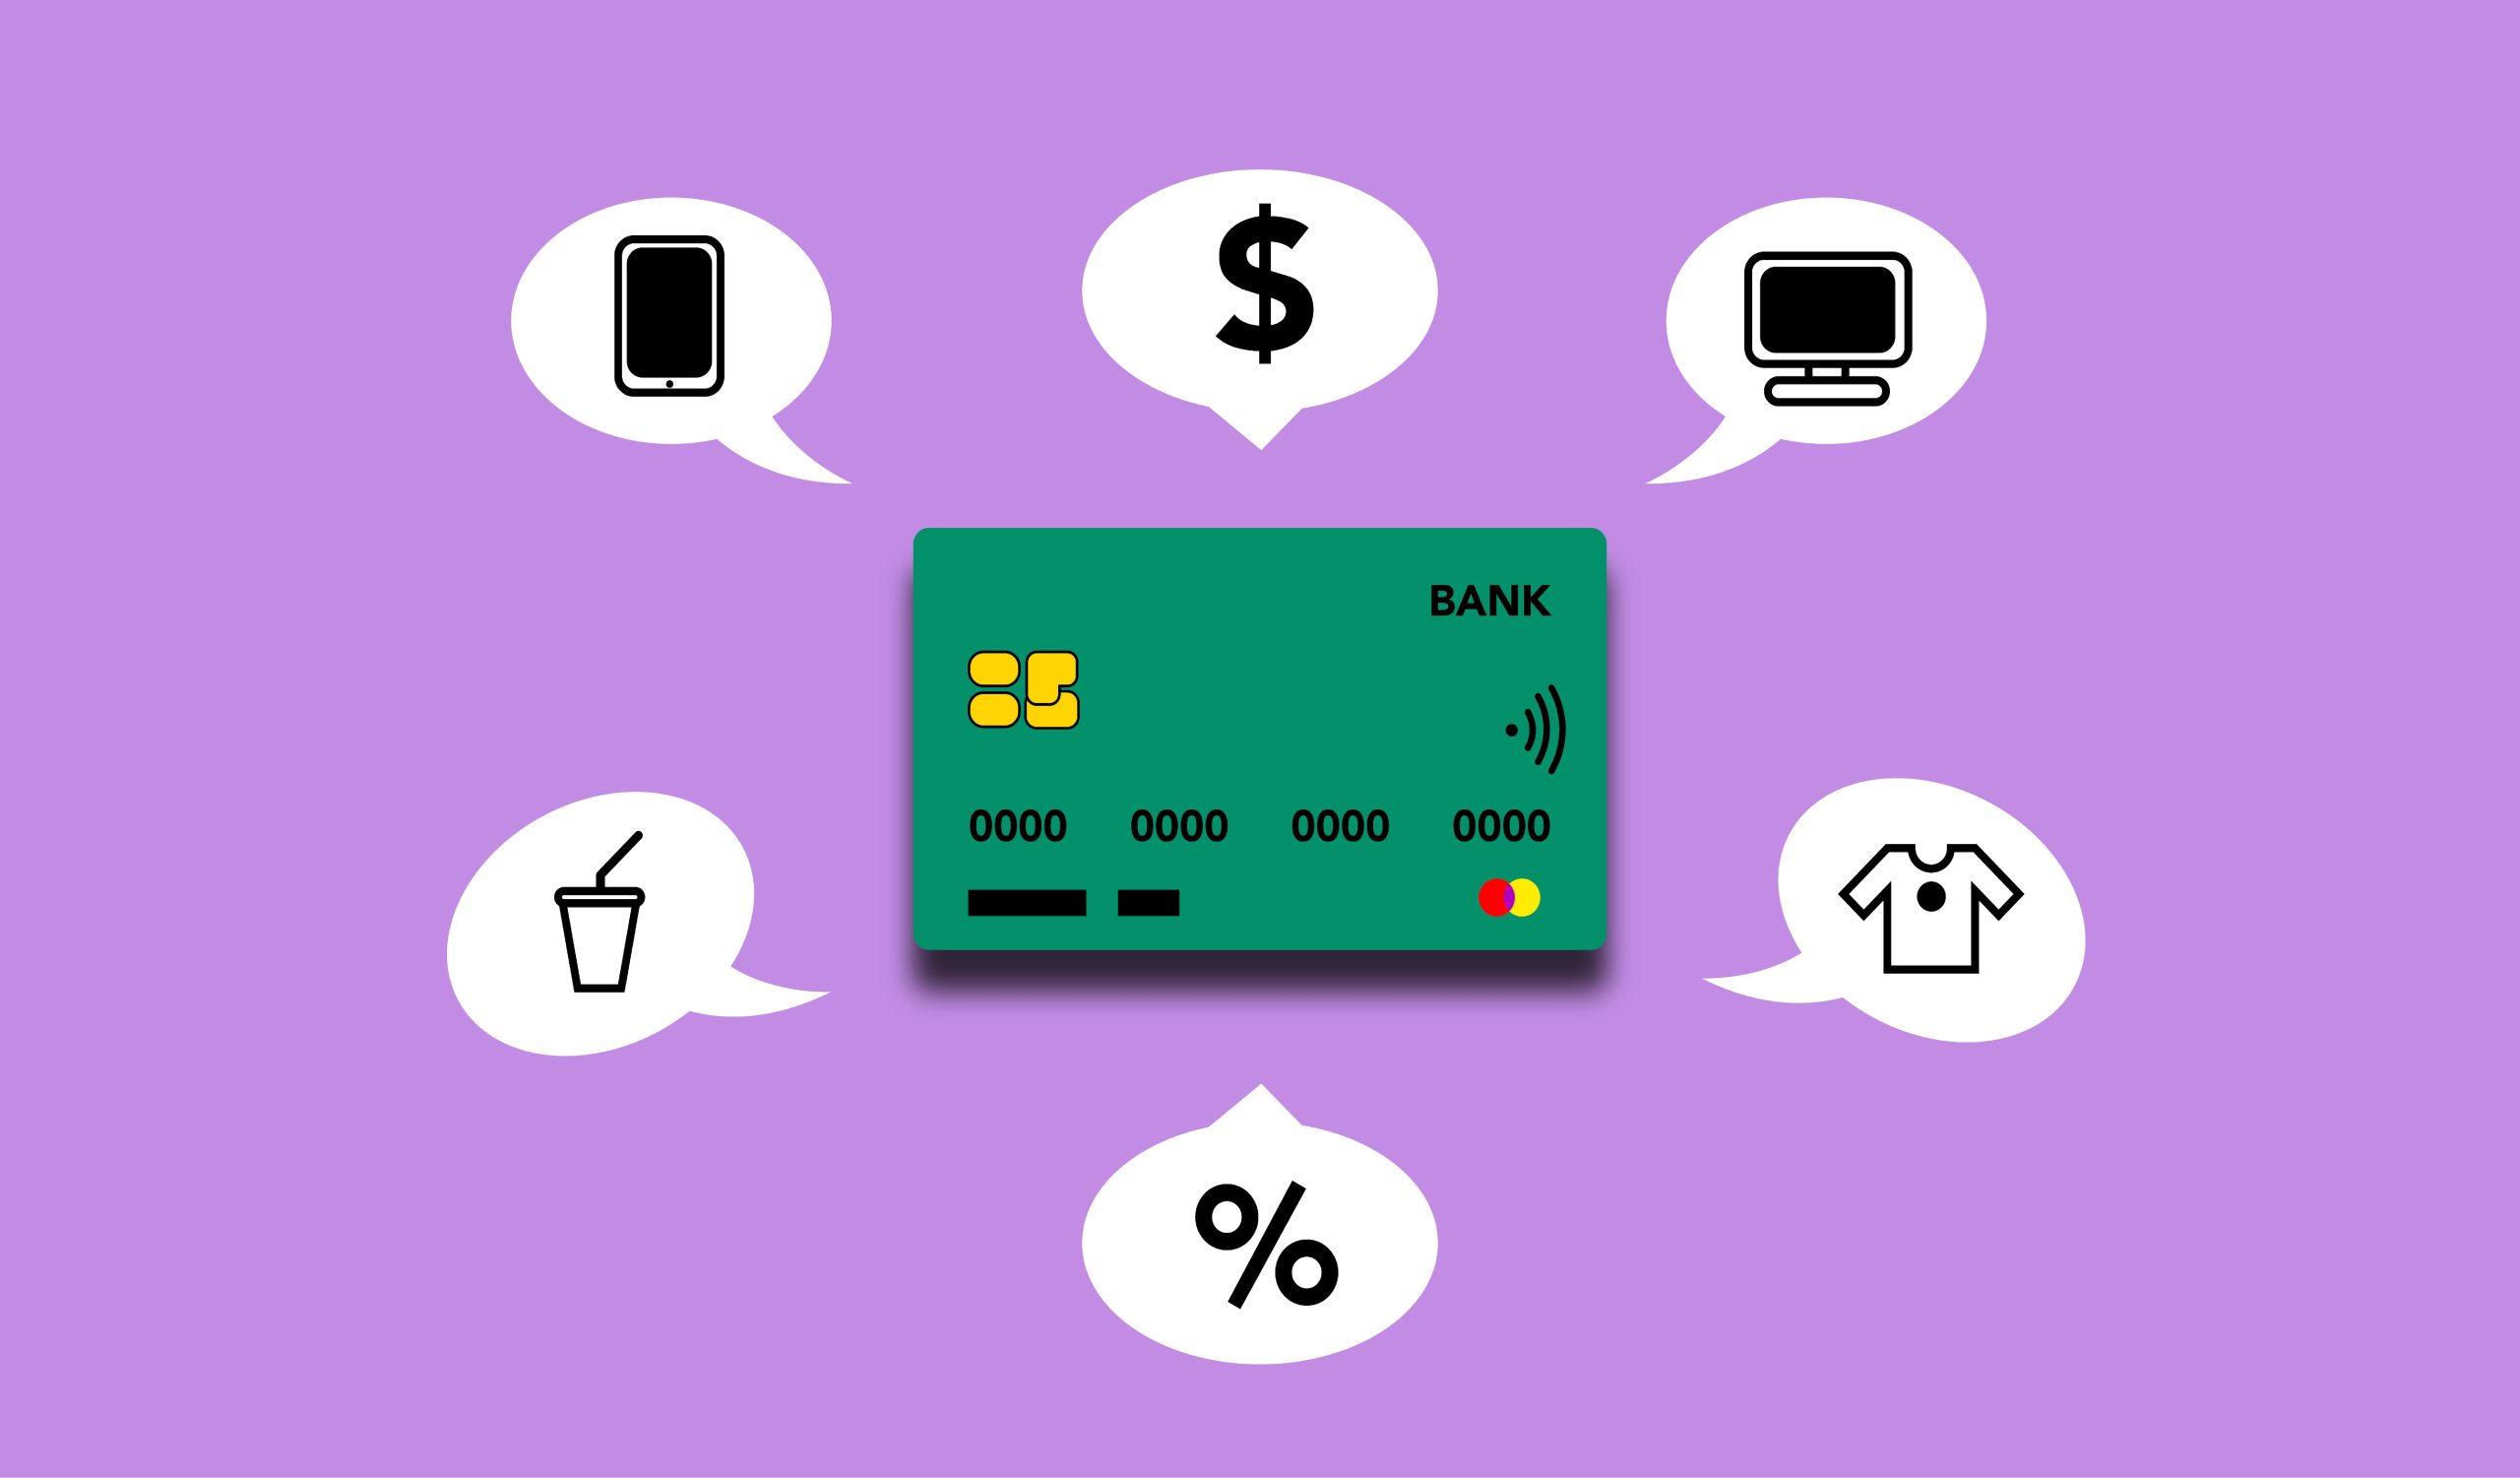 Integrated Payment Systems in Africa: More needs to be done to ensure they are truly inclusive.